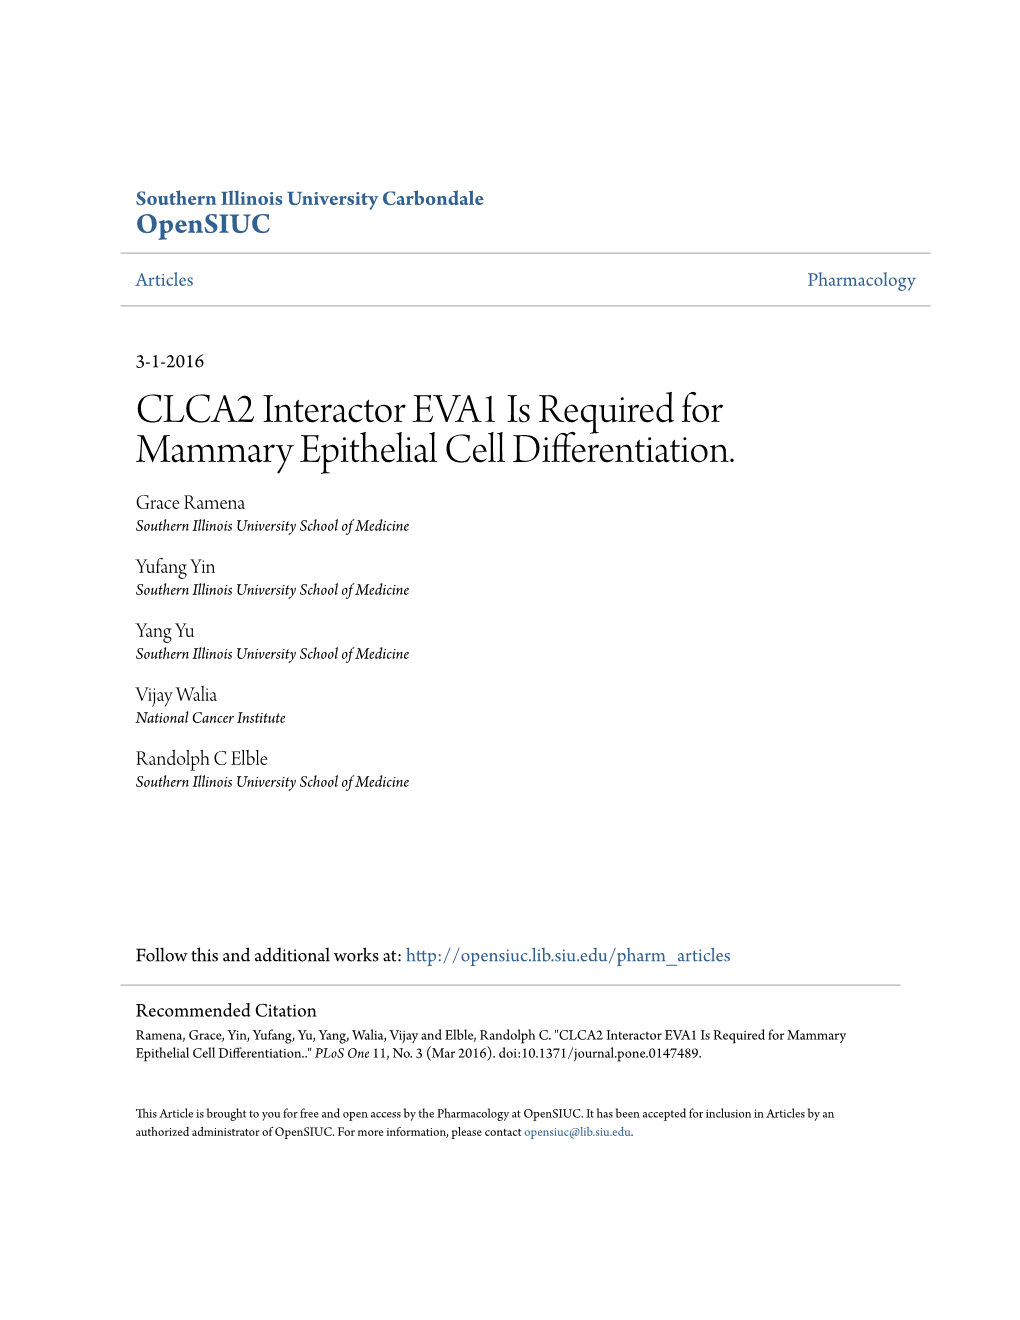 CLCA2 Interactor EVA1 Is Required for Mammary Epithelial Cell Differentiation